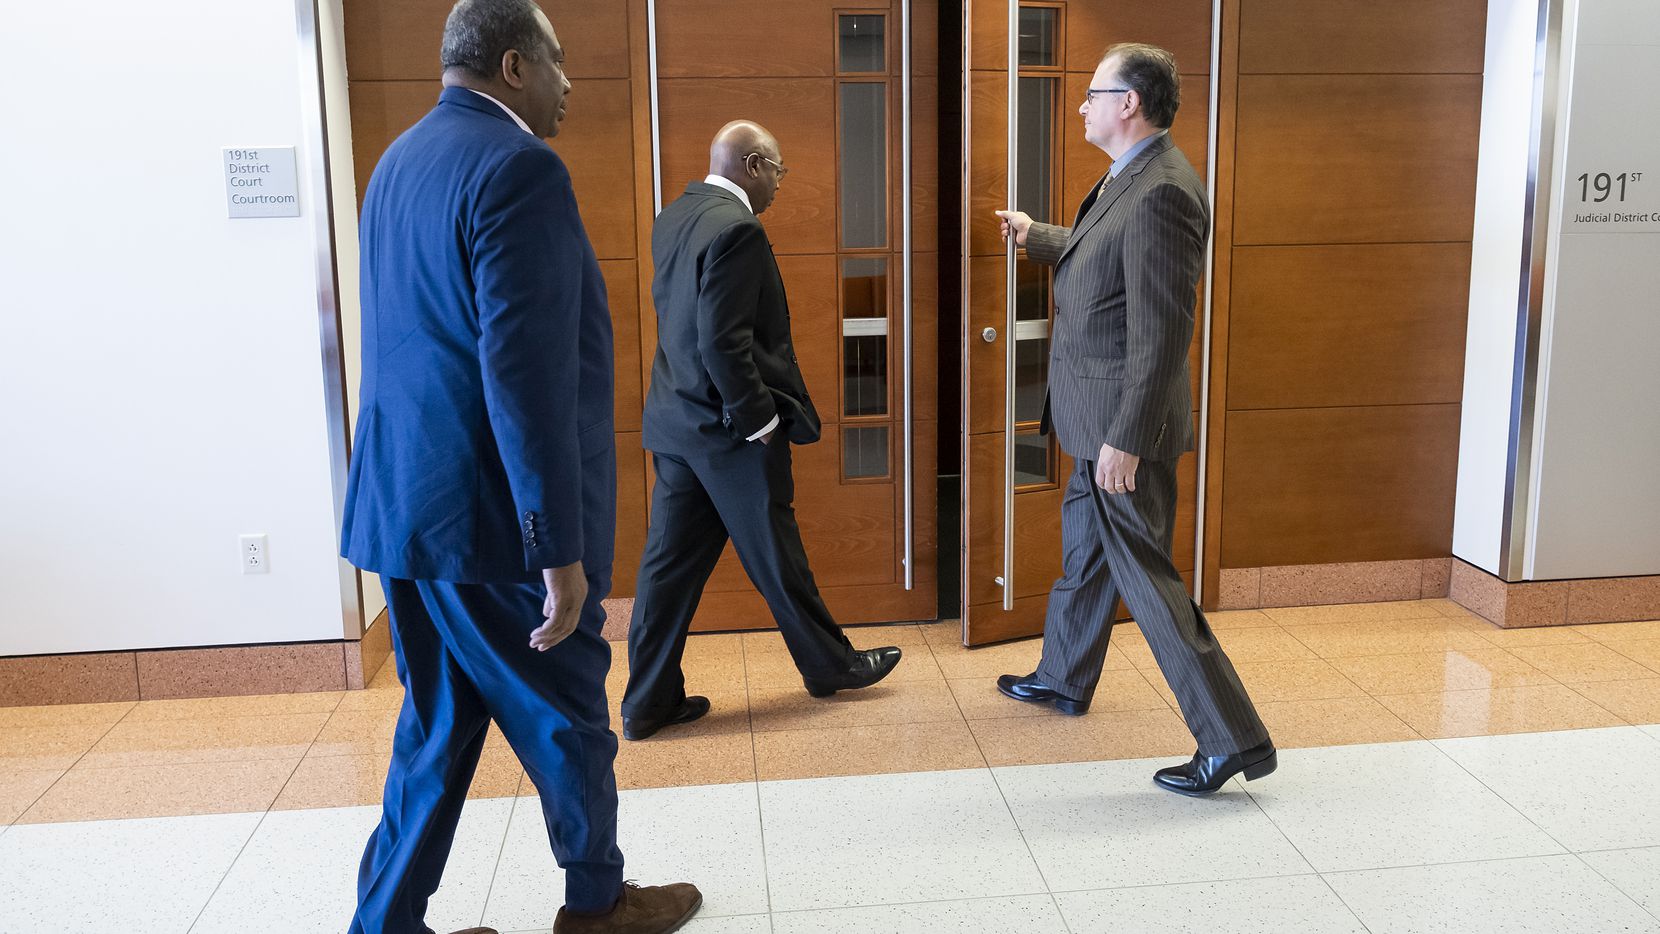 Chris Caso, interim Dallas city attorney (right), holds the door for Dallas council member Tennell Atkins and State Sen. Royce West to enter a hearing at Judge Gena Slaughter's courtroom at the  George L. Allen, Sr. Courts Building on Thursday, March 21, 2019. A hearing was held Thursday on the fate of what has become known as Shingle Mountain in southeast Dallas.